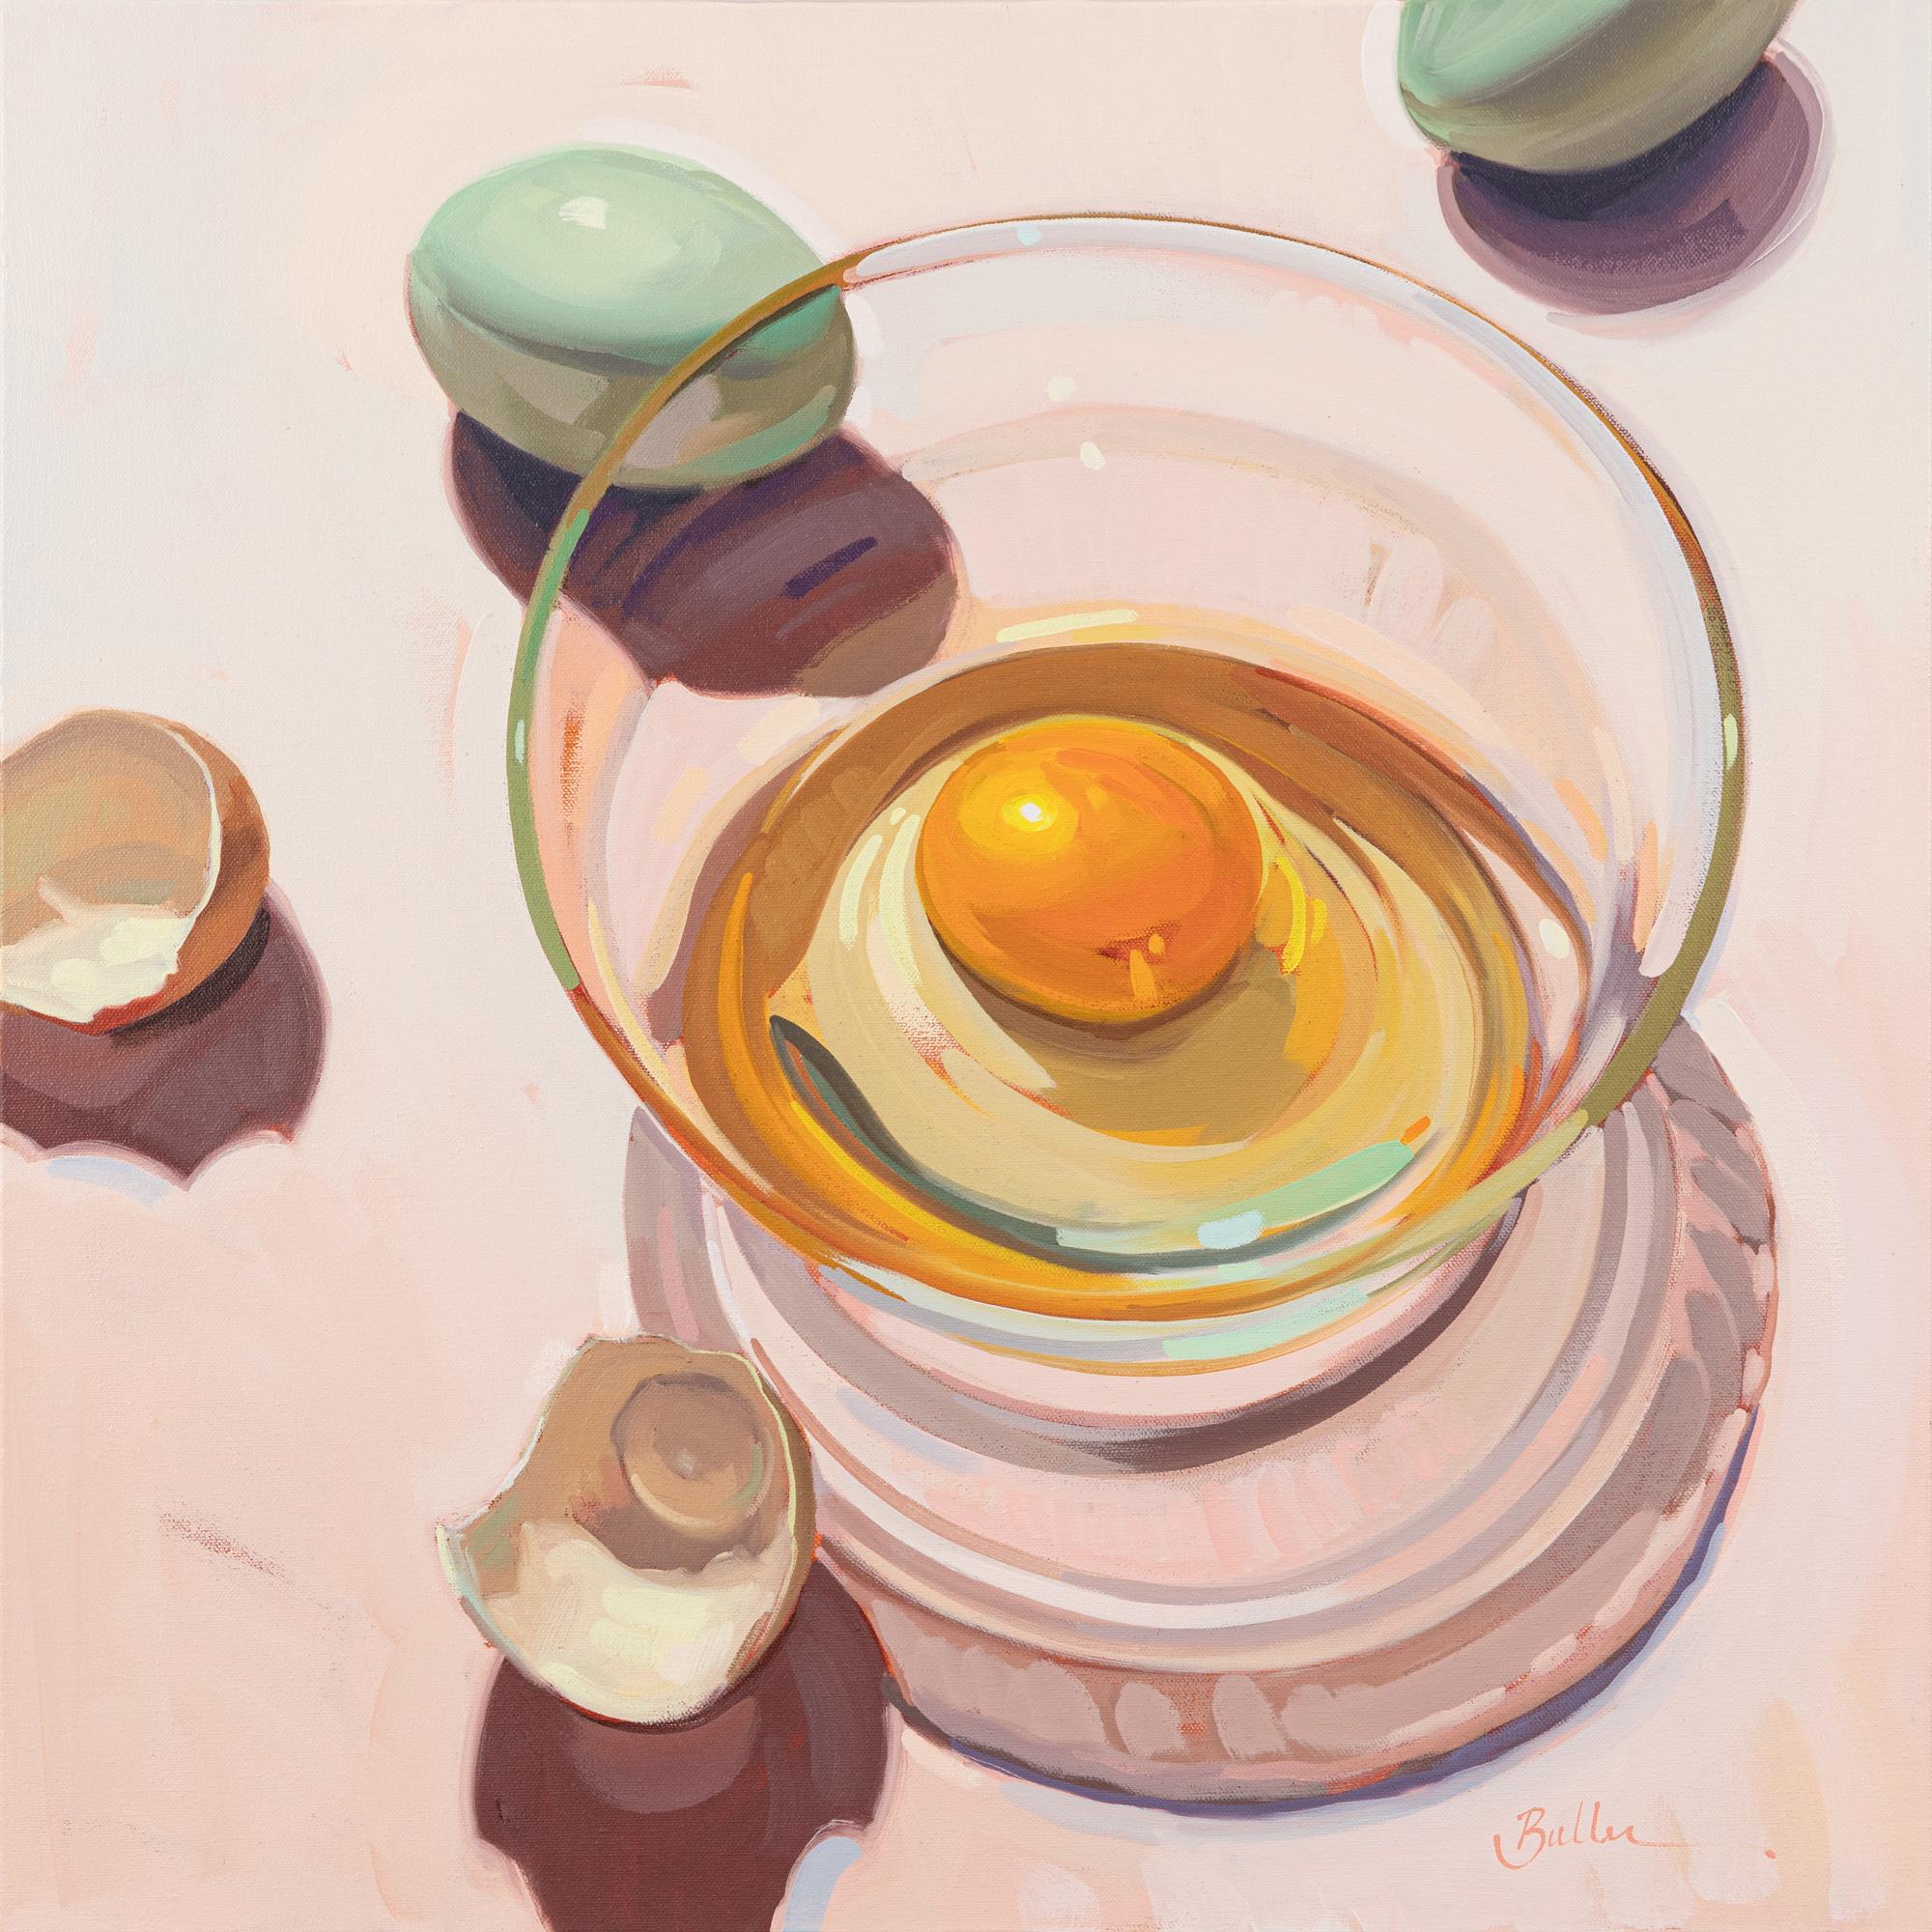 Samantha Buller Still-Life Painting - Let Me Take A Crack at It - A Bright and Colorful Still Life Painting of Eggs